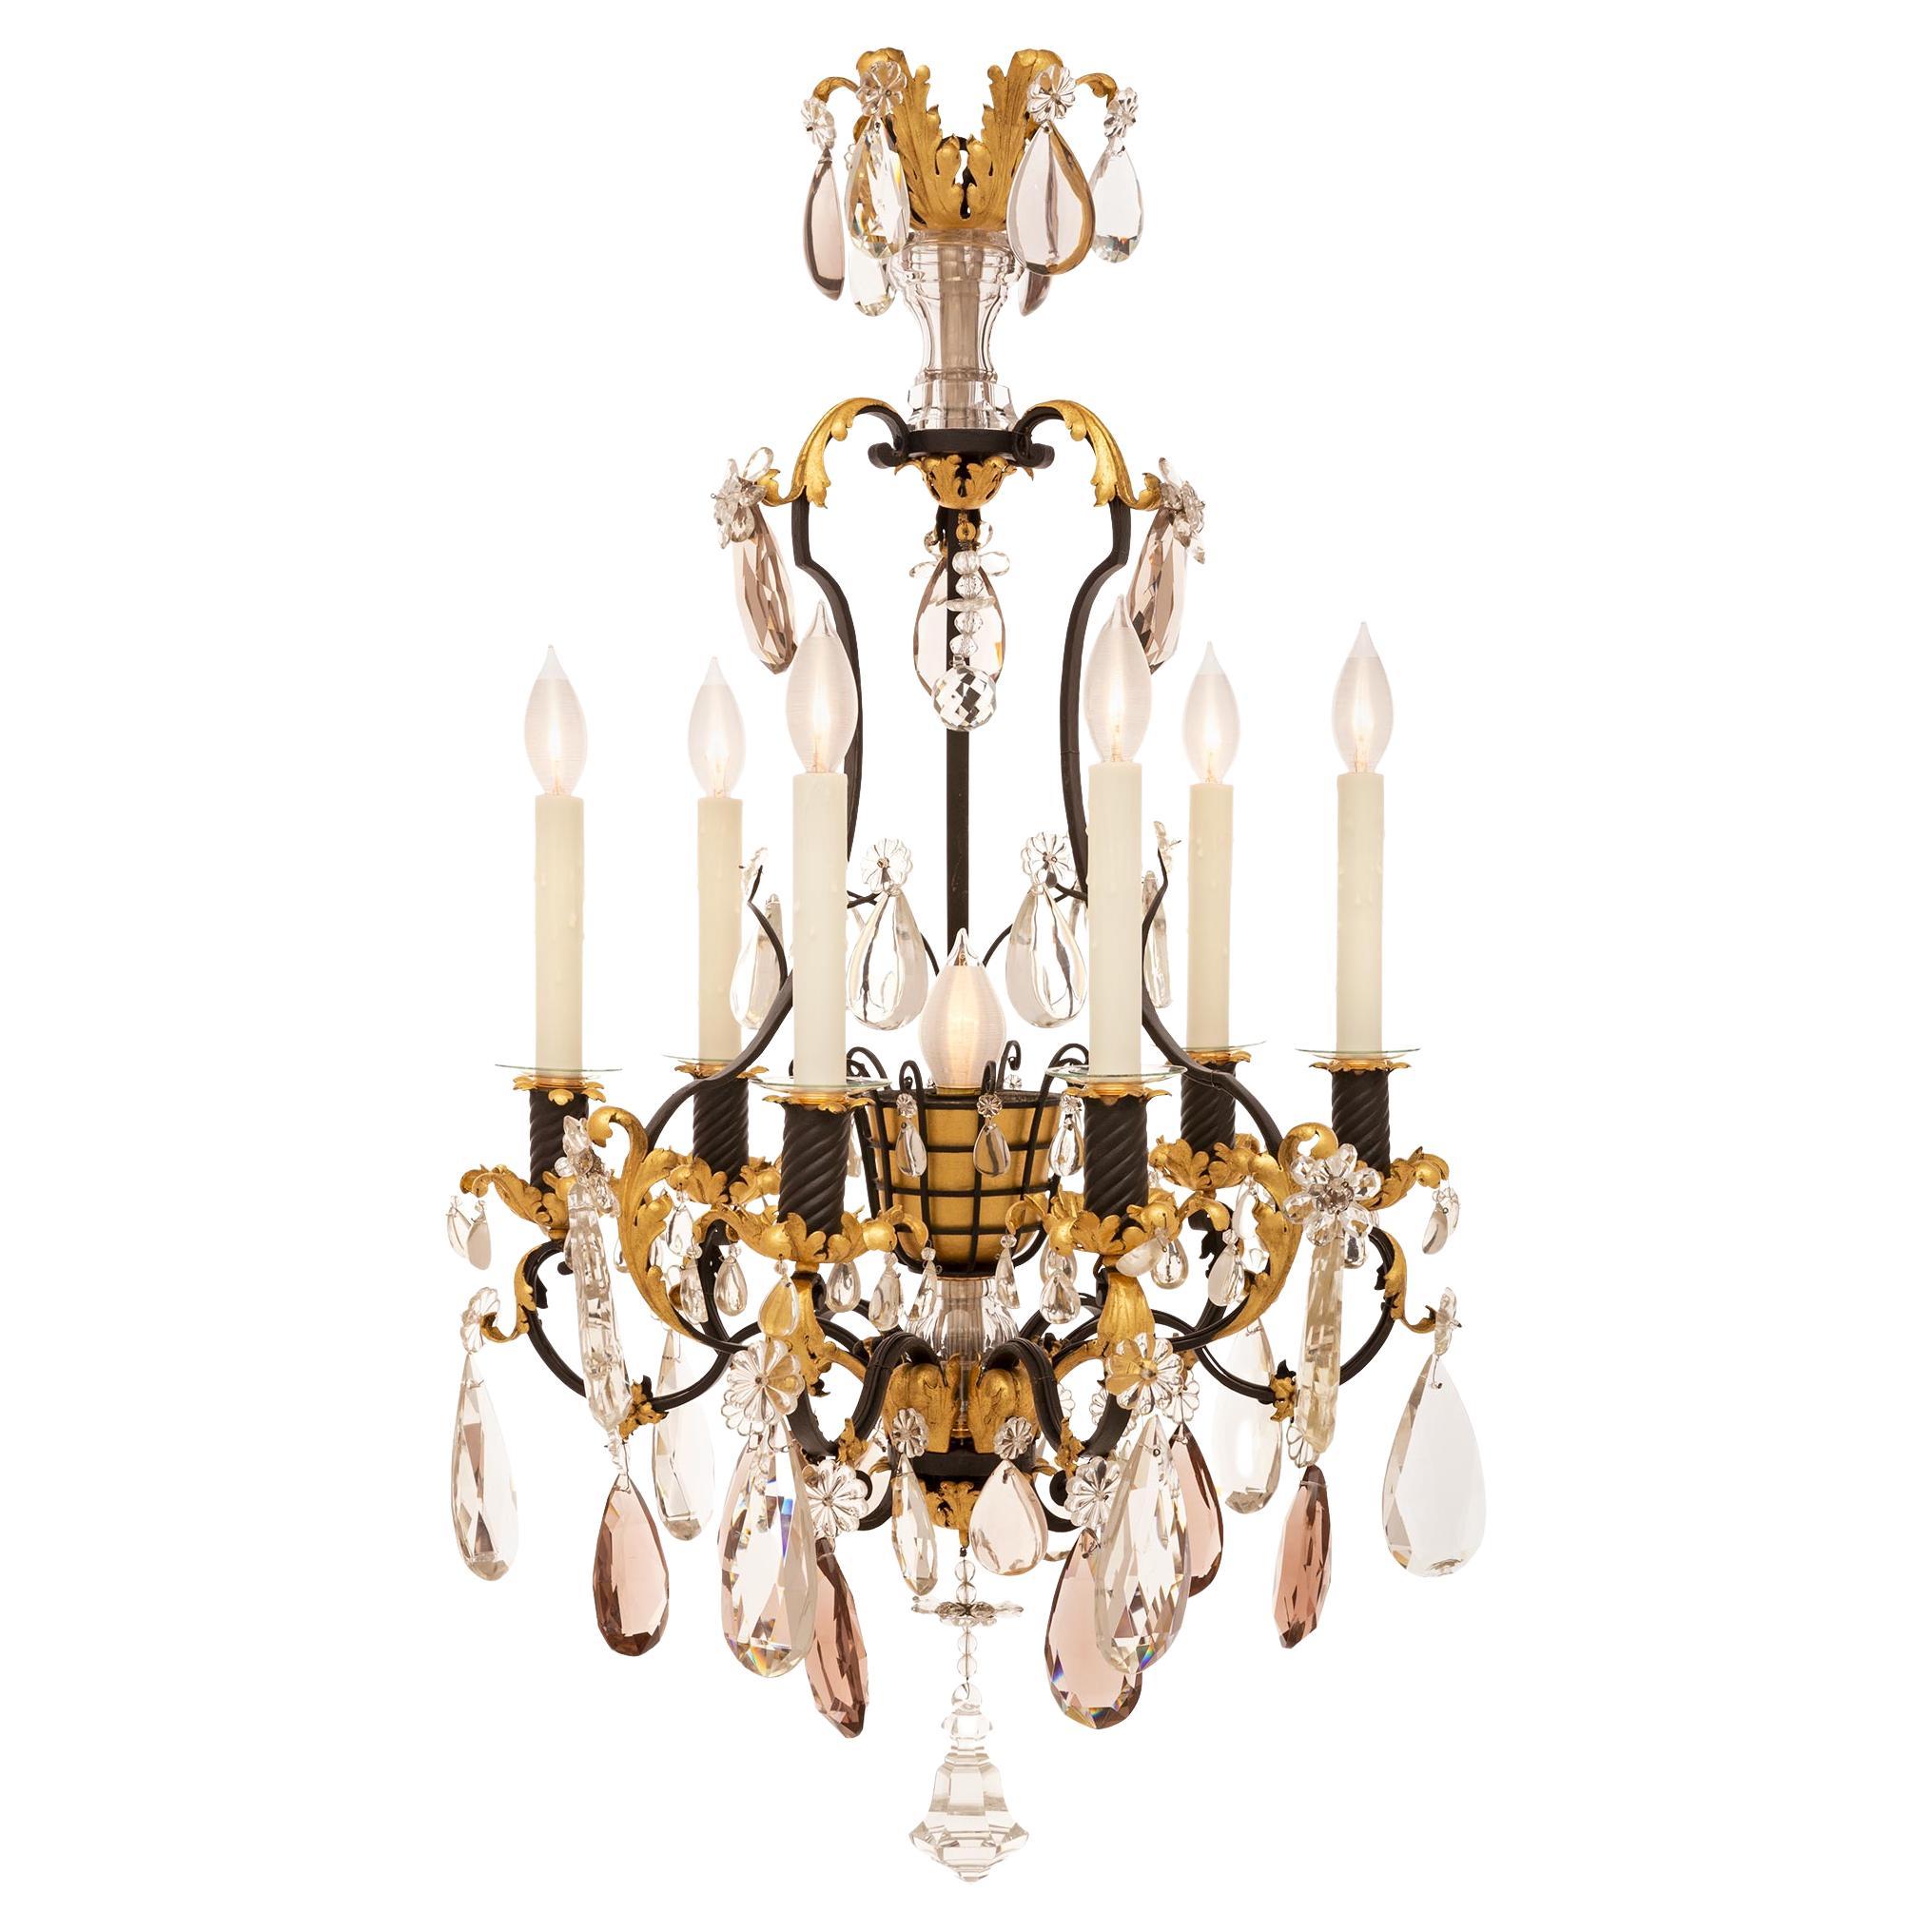 French 19th Century Louis XVI St. Wrought Iron, Gilt Metal & Crystal Chandelier For Sale